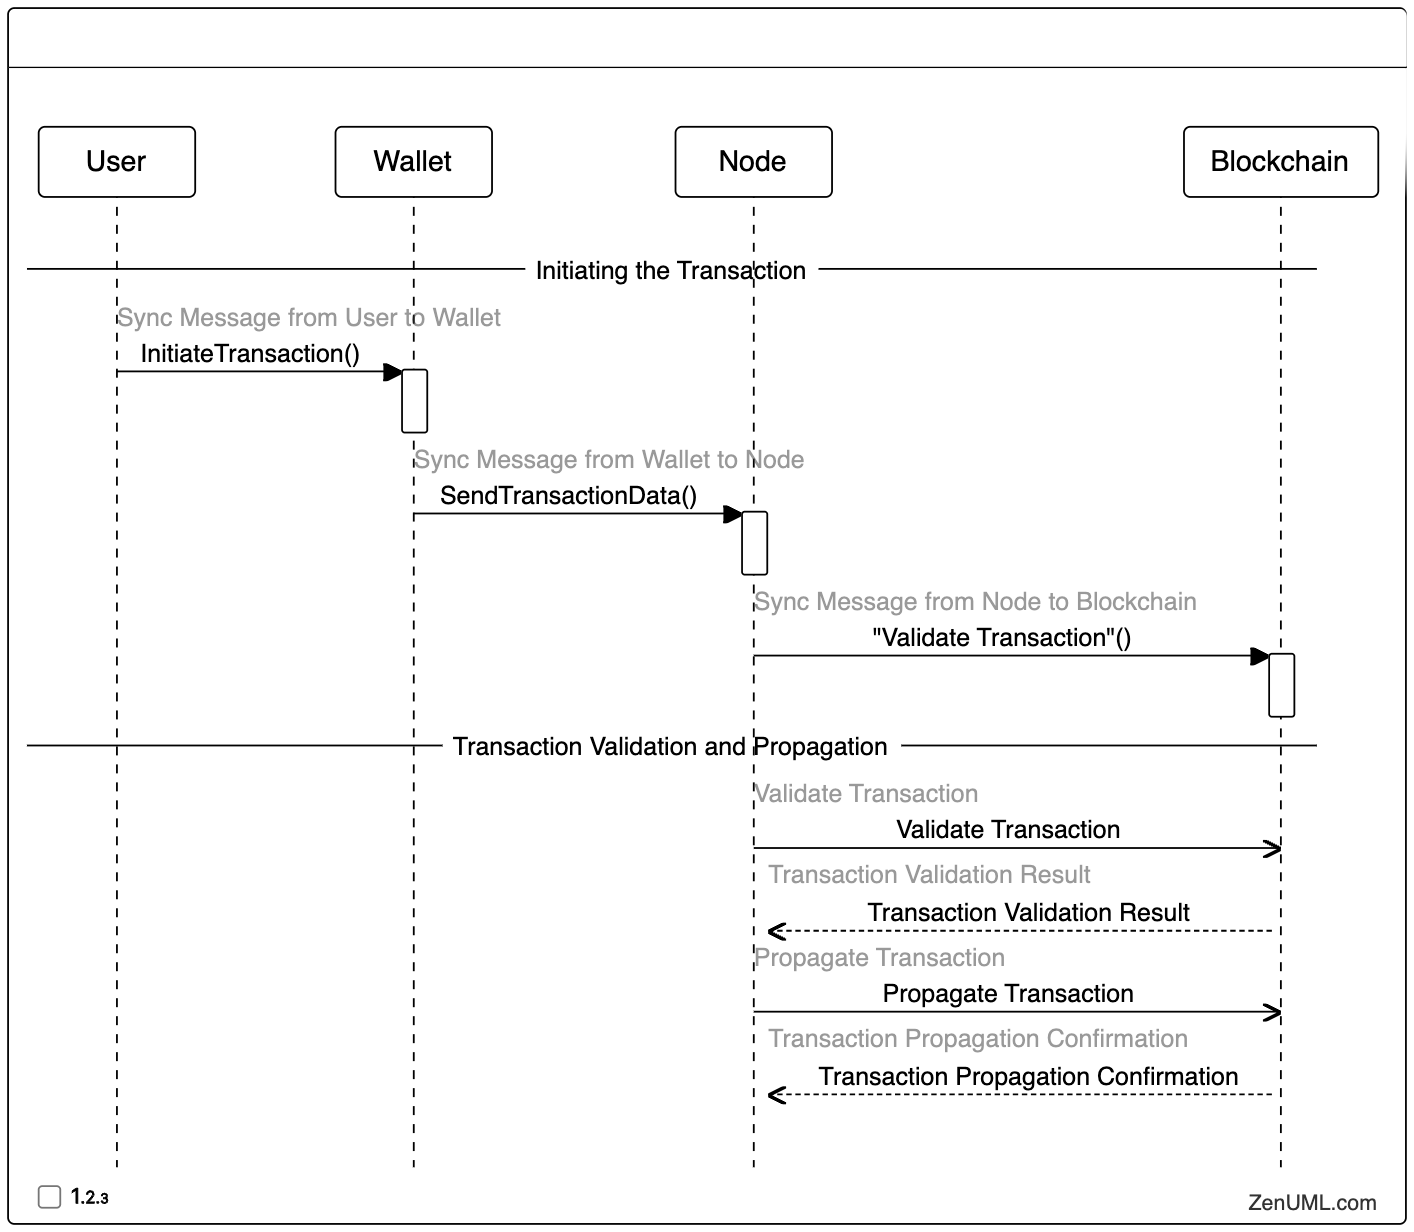 Transaction Validation and Propagation in ZenUML Sequence Diagram